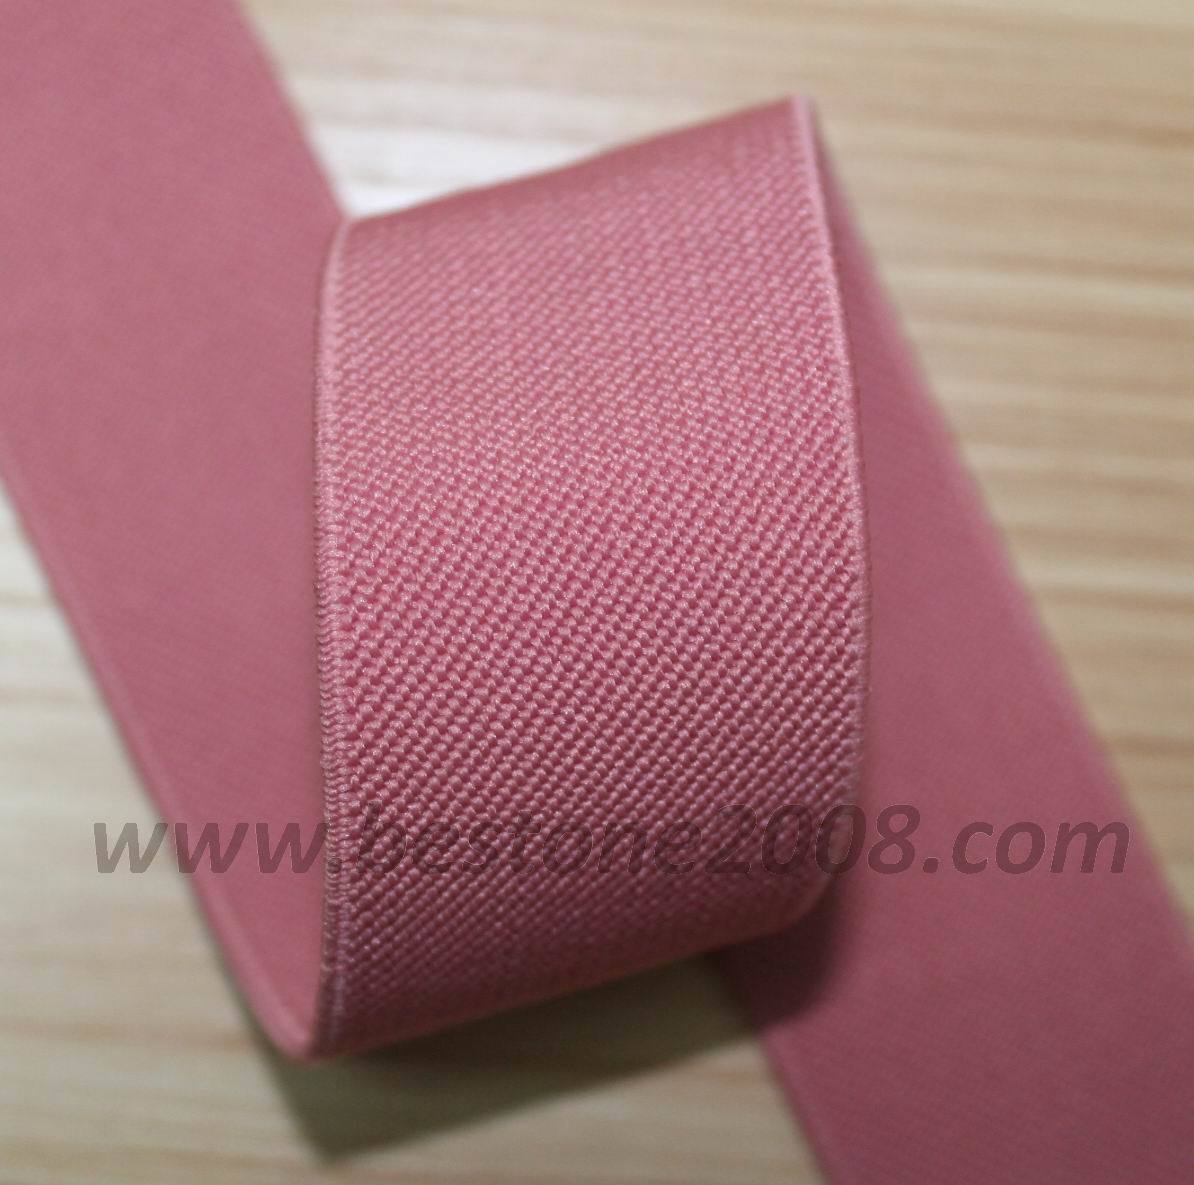 High Quality Elastic Band for Bag and Garment Accessories Webbing